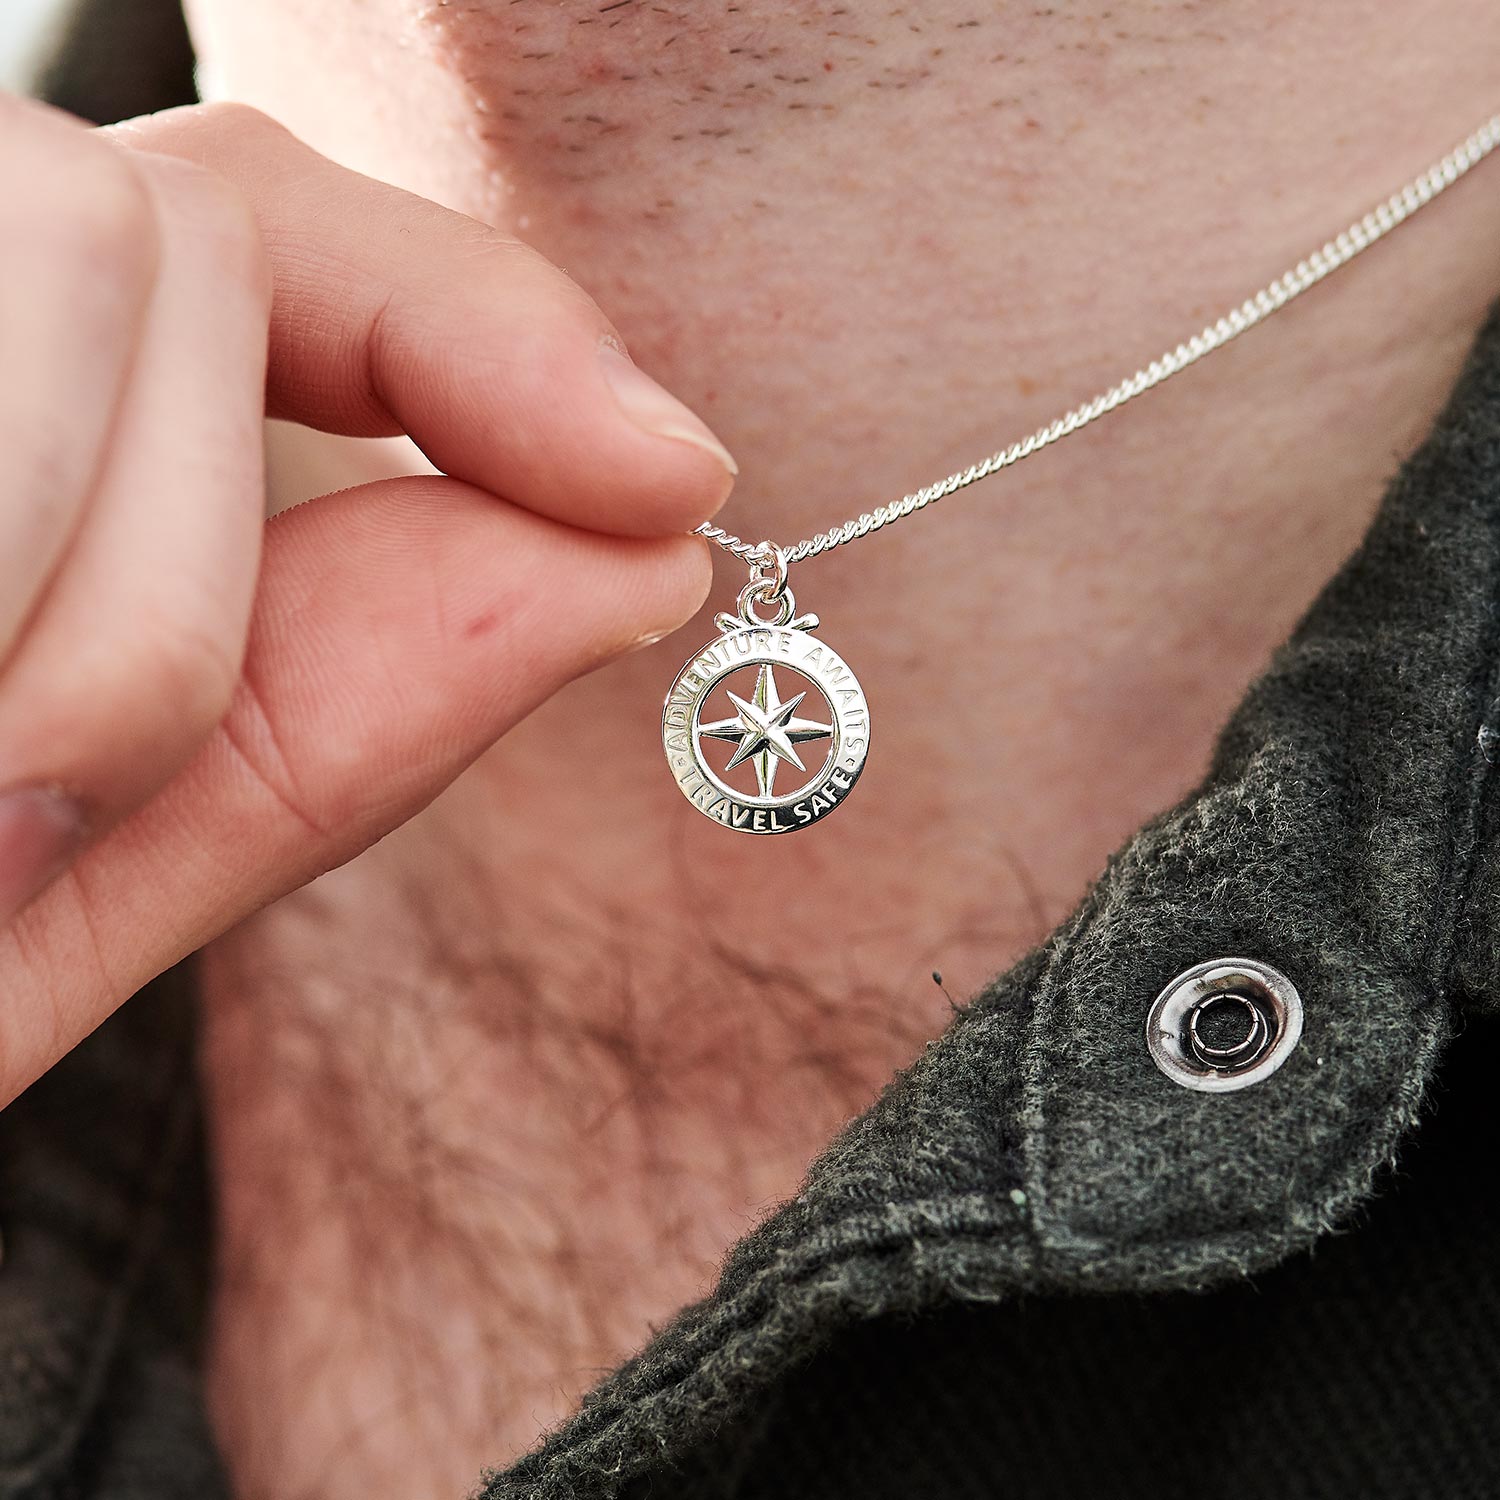 AZFVBQL Compass Necklace for Men Chain Stainless Steel Compass Pendants Male  Jewelry (Black-Compass-21.6in Chain) | Amazon.com